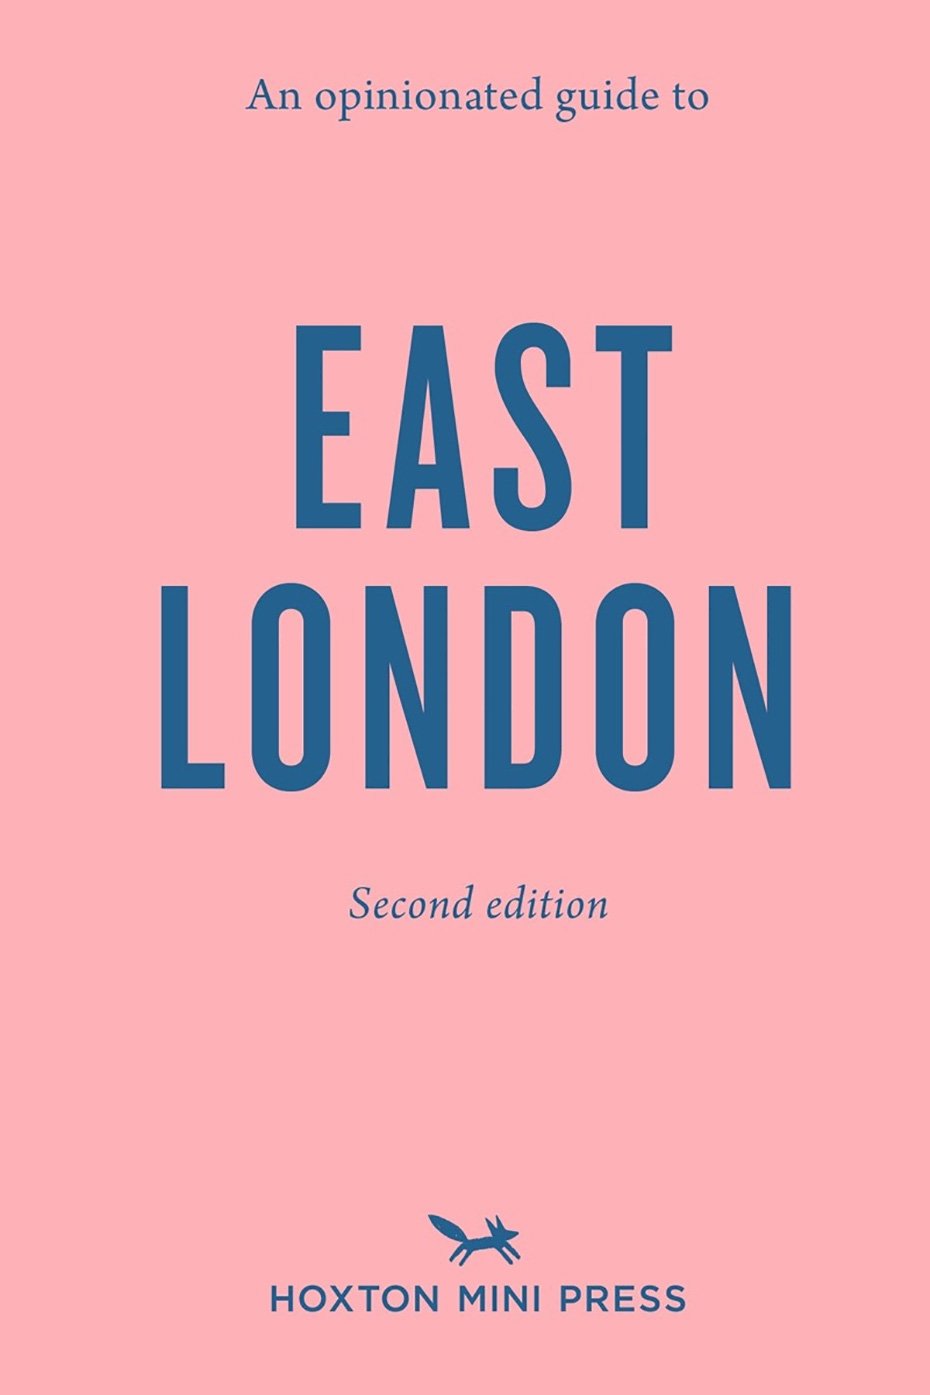 Hoxton Mini Press HOXTON MINI PRESS AN OPINIONATED GUIDE TO EAST LONDON 2nd EDITION